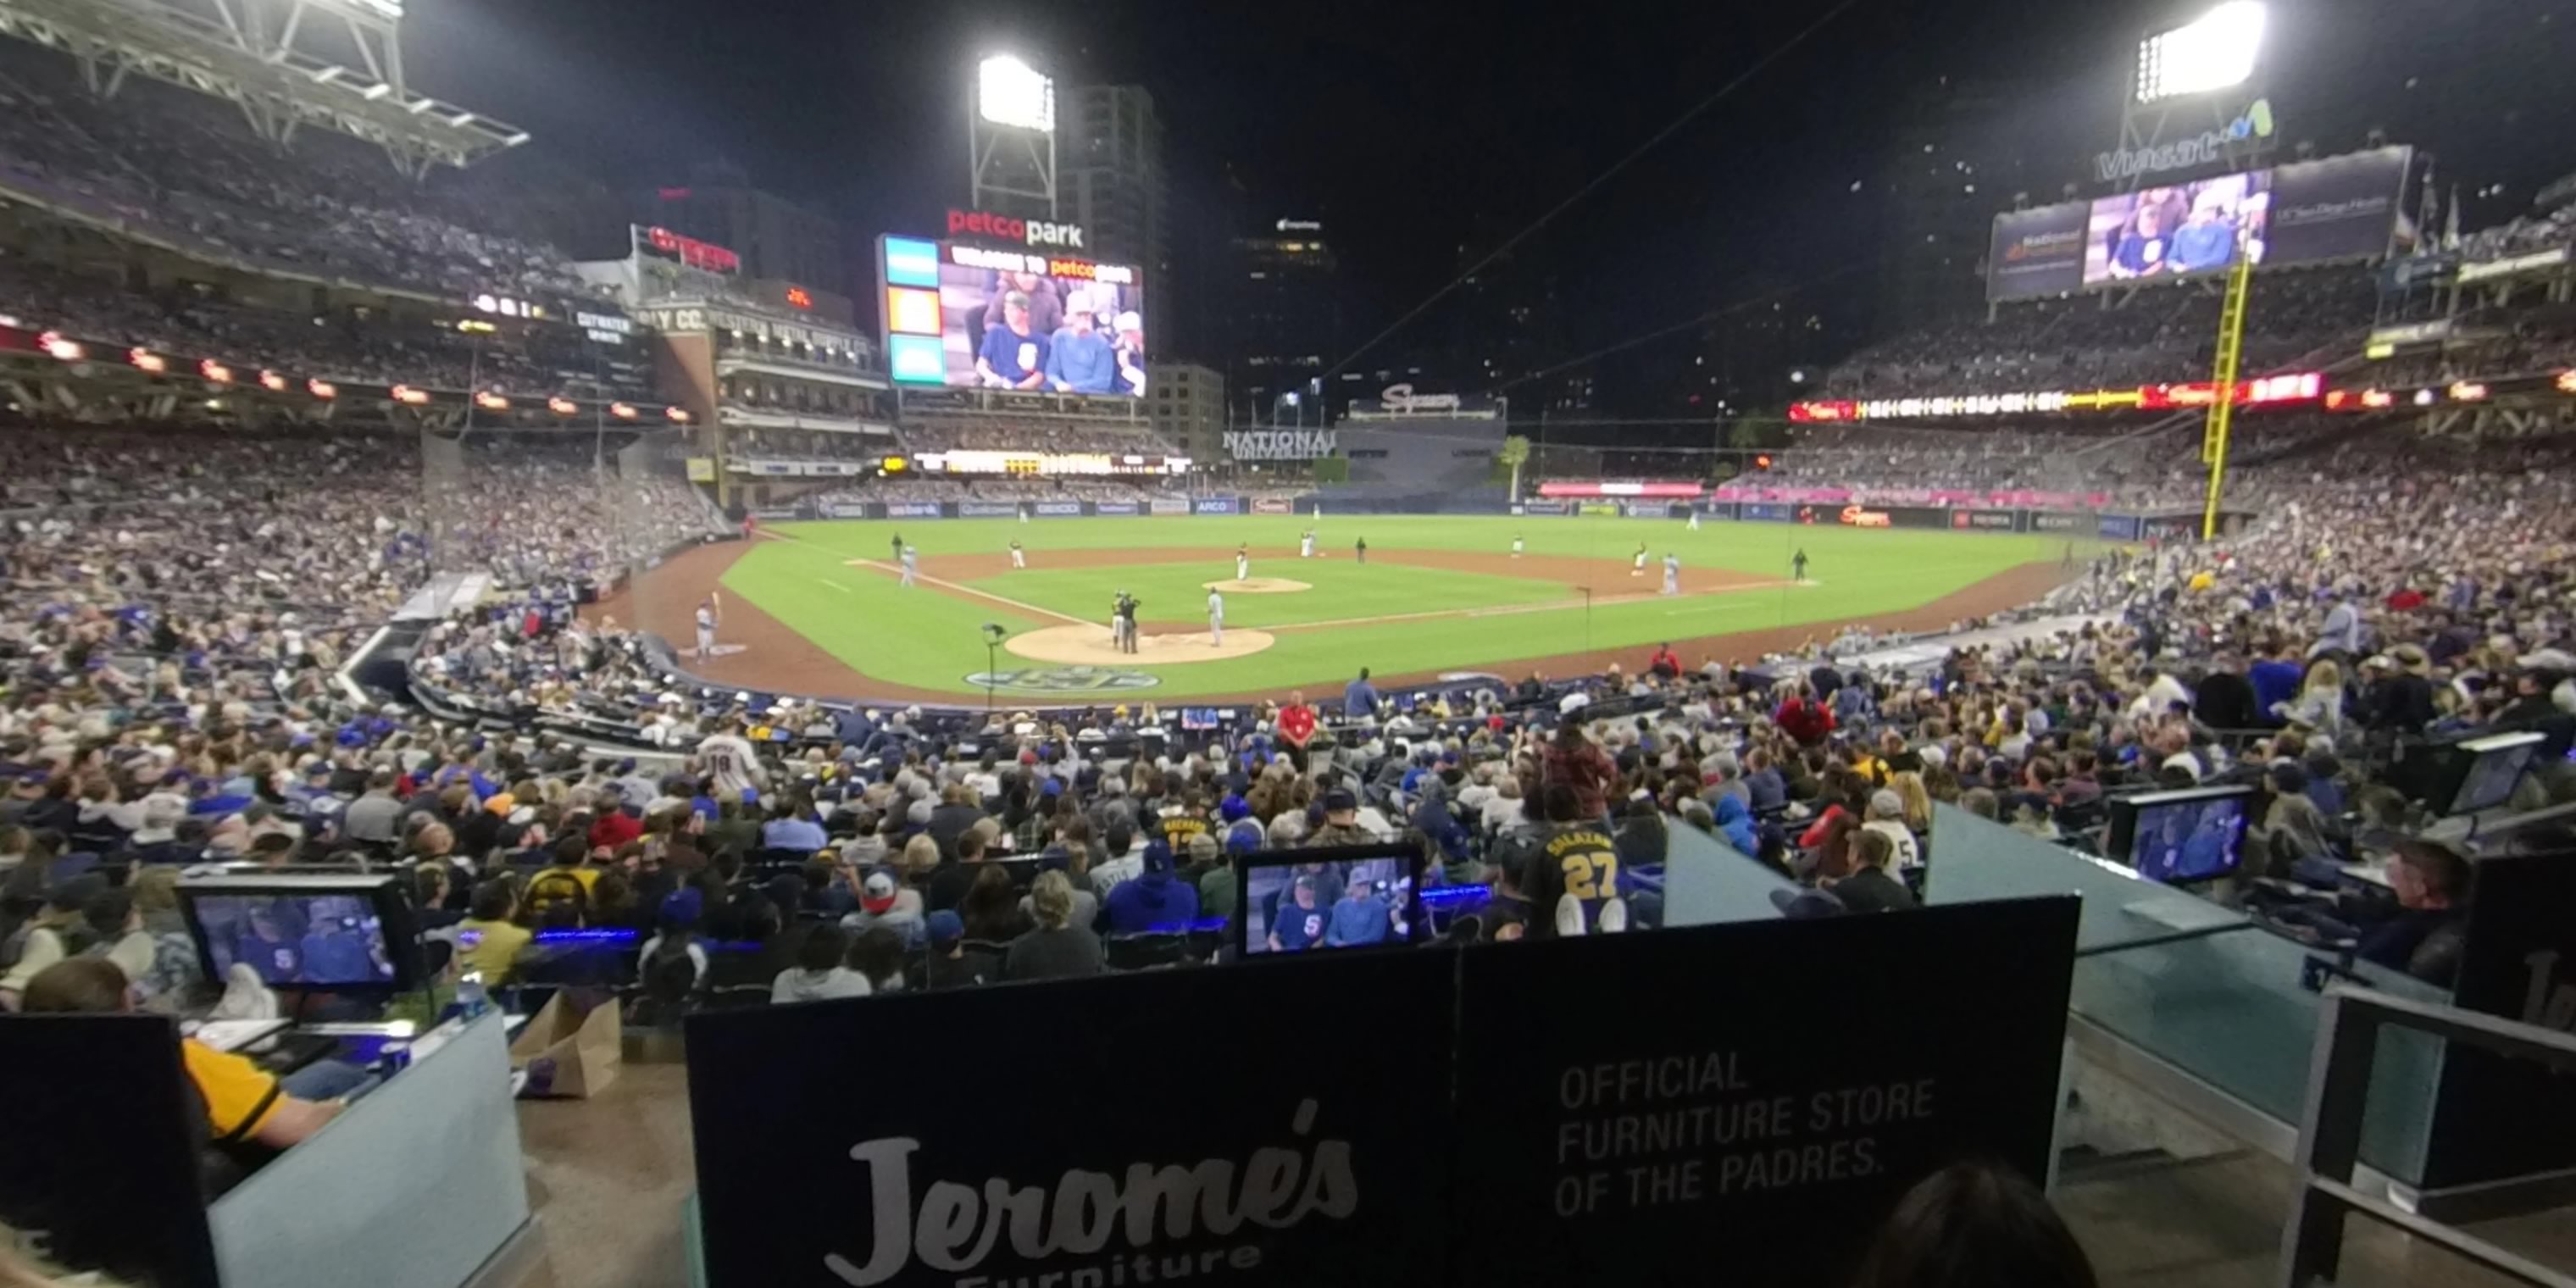 Section 103 at PETCO Park 